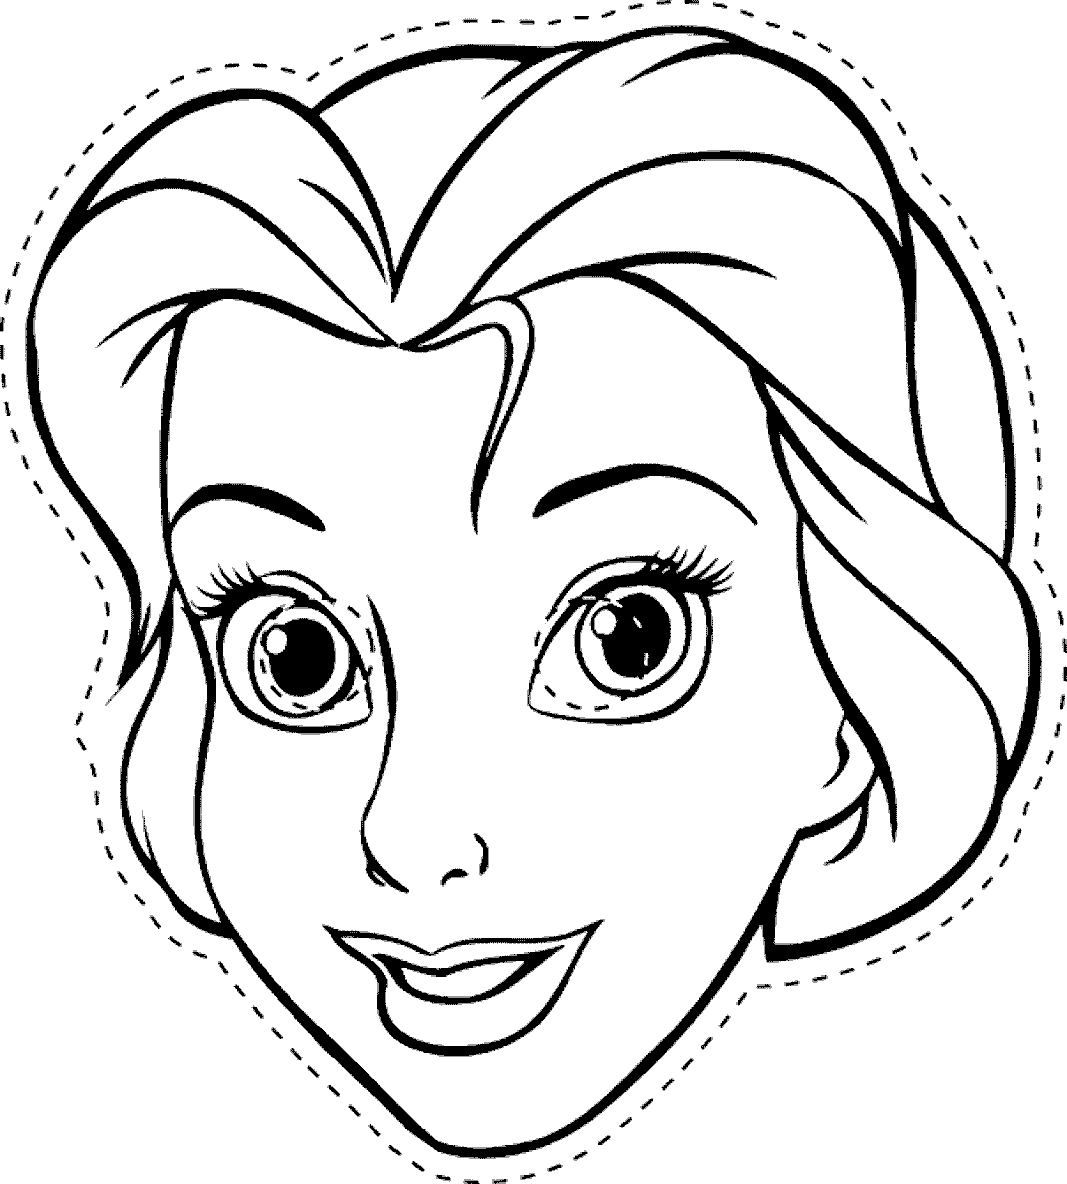 Related Mask Coloring Pages item-4058, Mask Coloring Pages ...